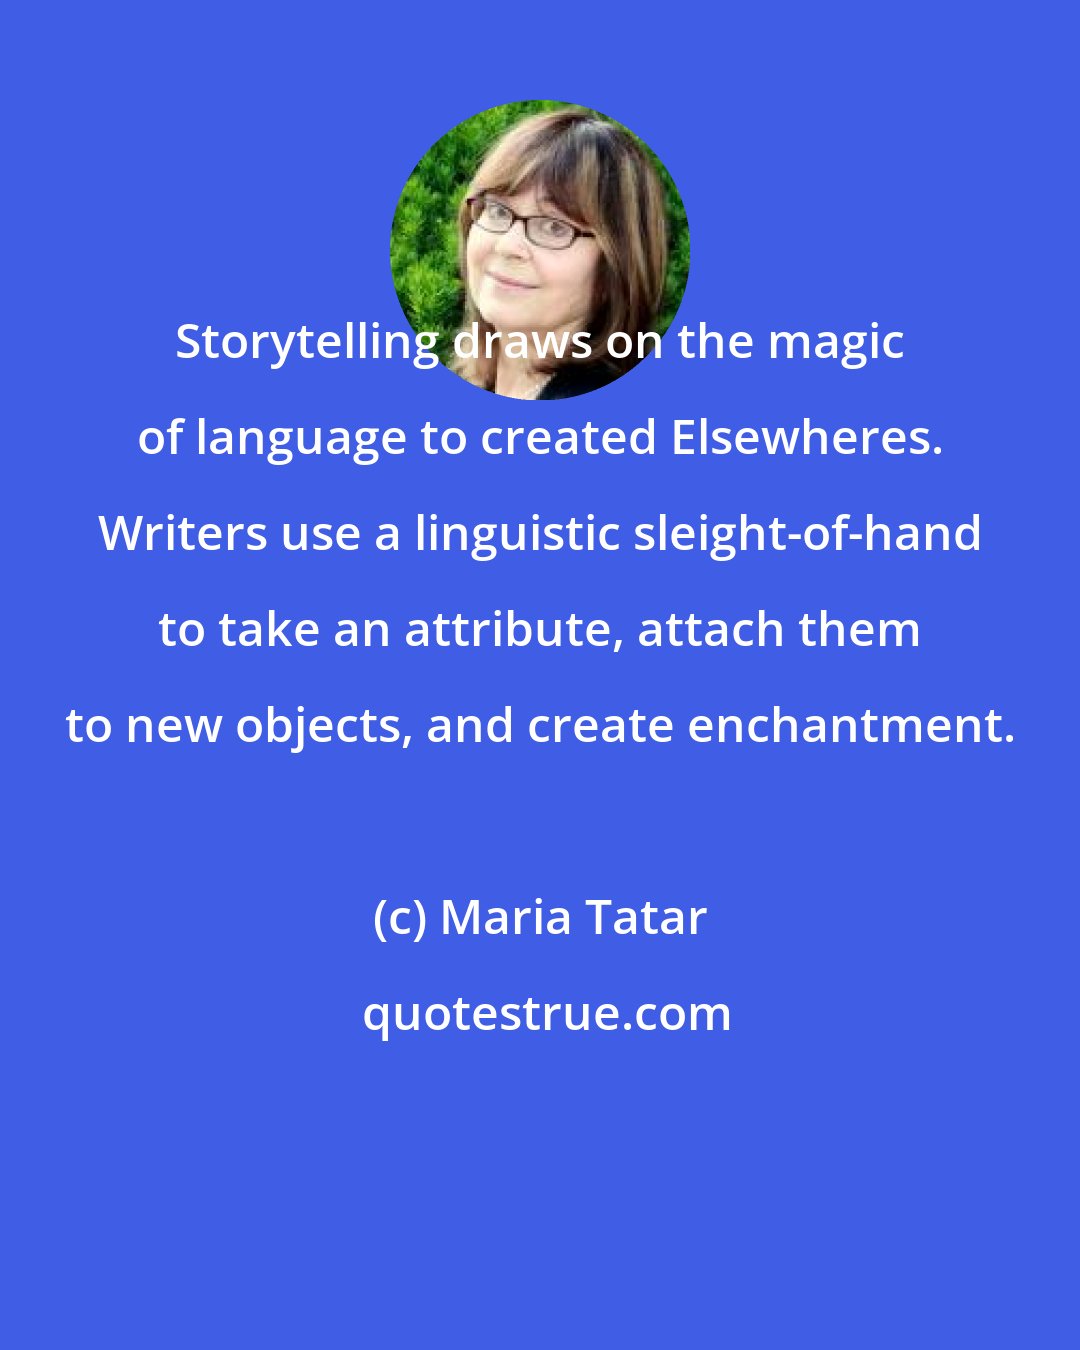 Maria Tatar: Storytelling draws on the magic of language to created Elsewheres. Writers use a linguistic sleight-of-hand to take an attribute, attach them to new objects, and create enchantment.